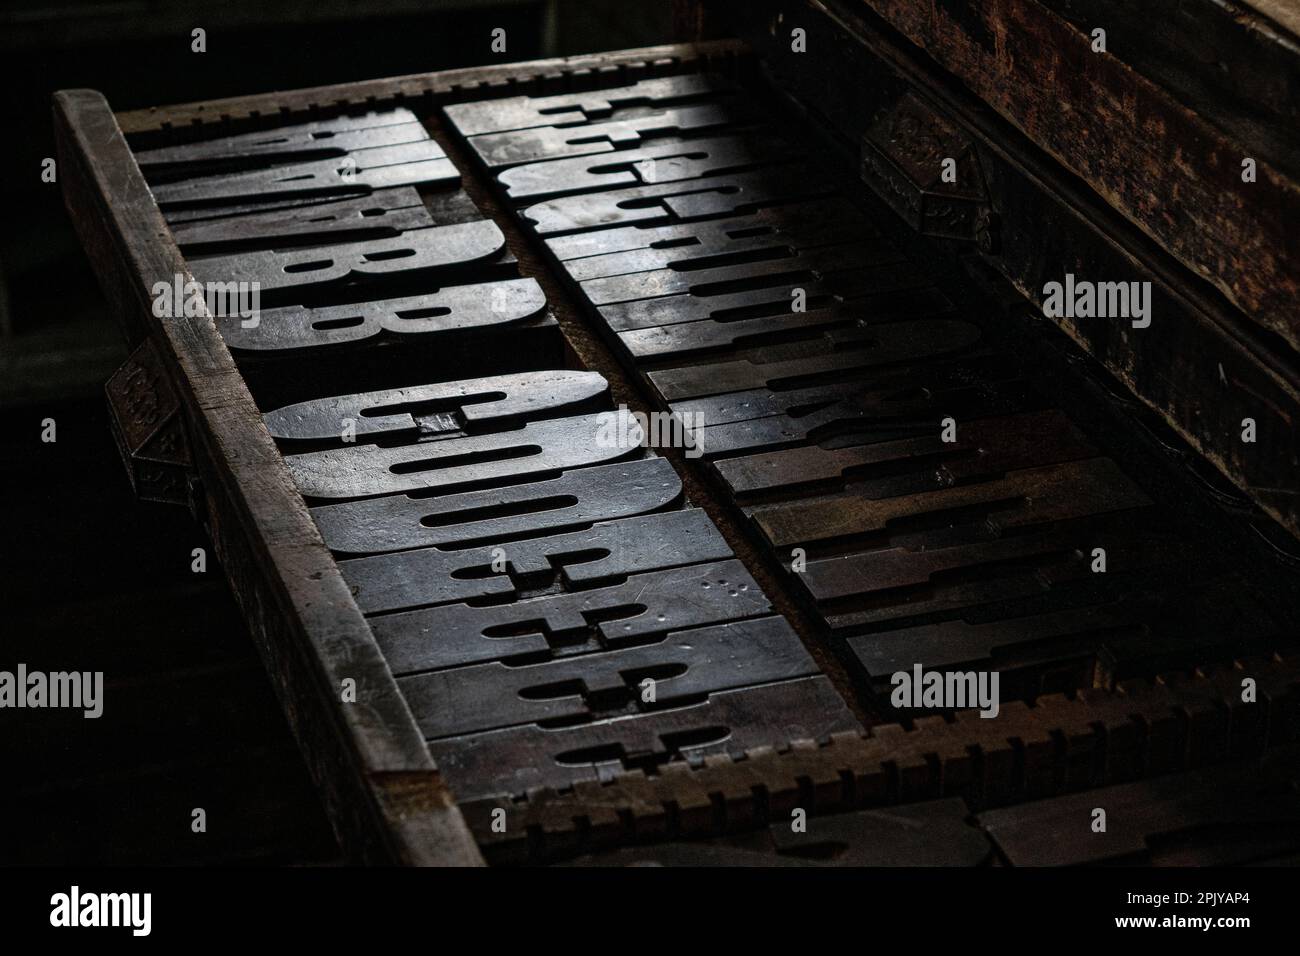 ABCDEF...Printing Press letters Stock Photo